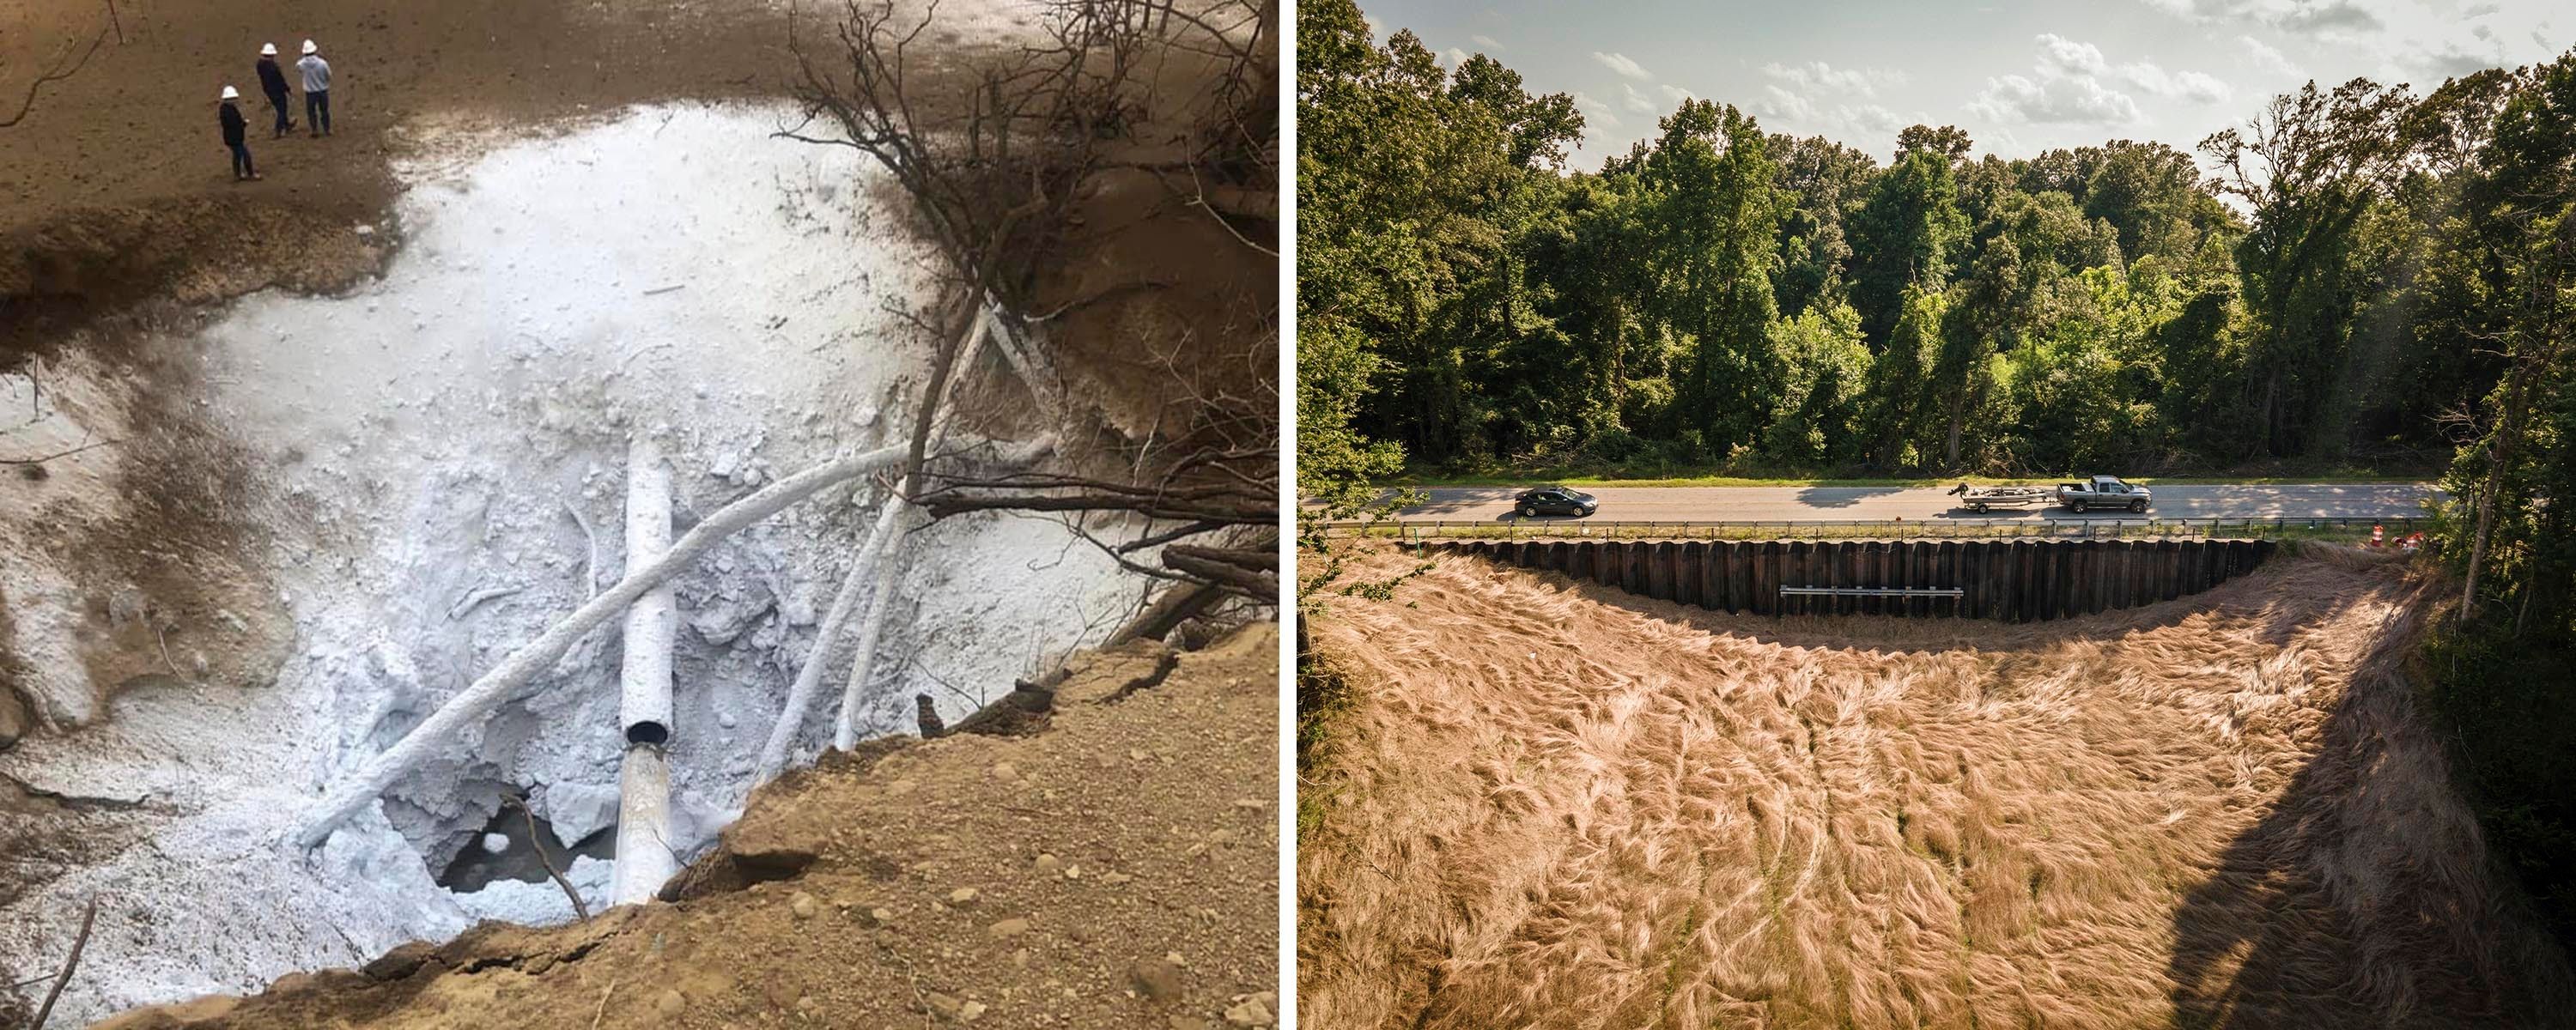 LEFT: The CO2 pipeline rupture. RIGHT: Vehicles pass over the pipeline explosion site in Satartia in July.Yazoo County Emergency Management Agency/Rory Doyle for HuffPost